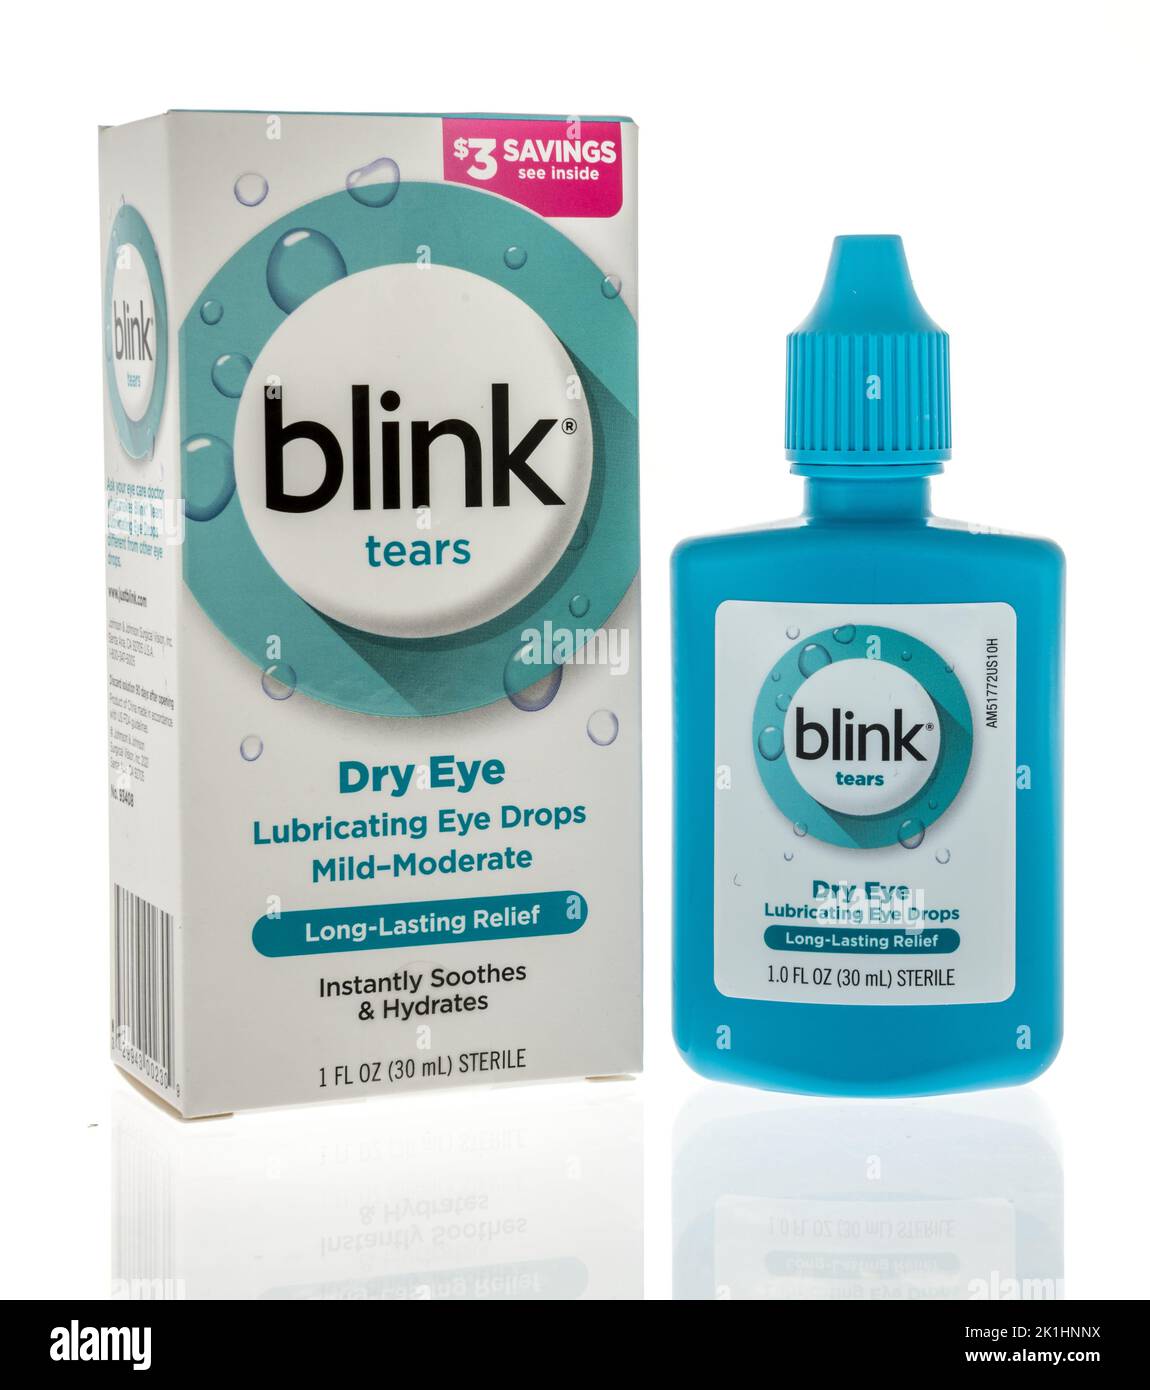 Winneconne, WI - 11 September 2022: A package of Blink tears dry eye lubricating eye drops on an isolated background. Stock Photo